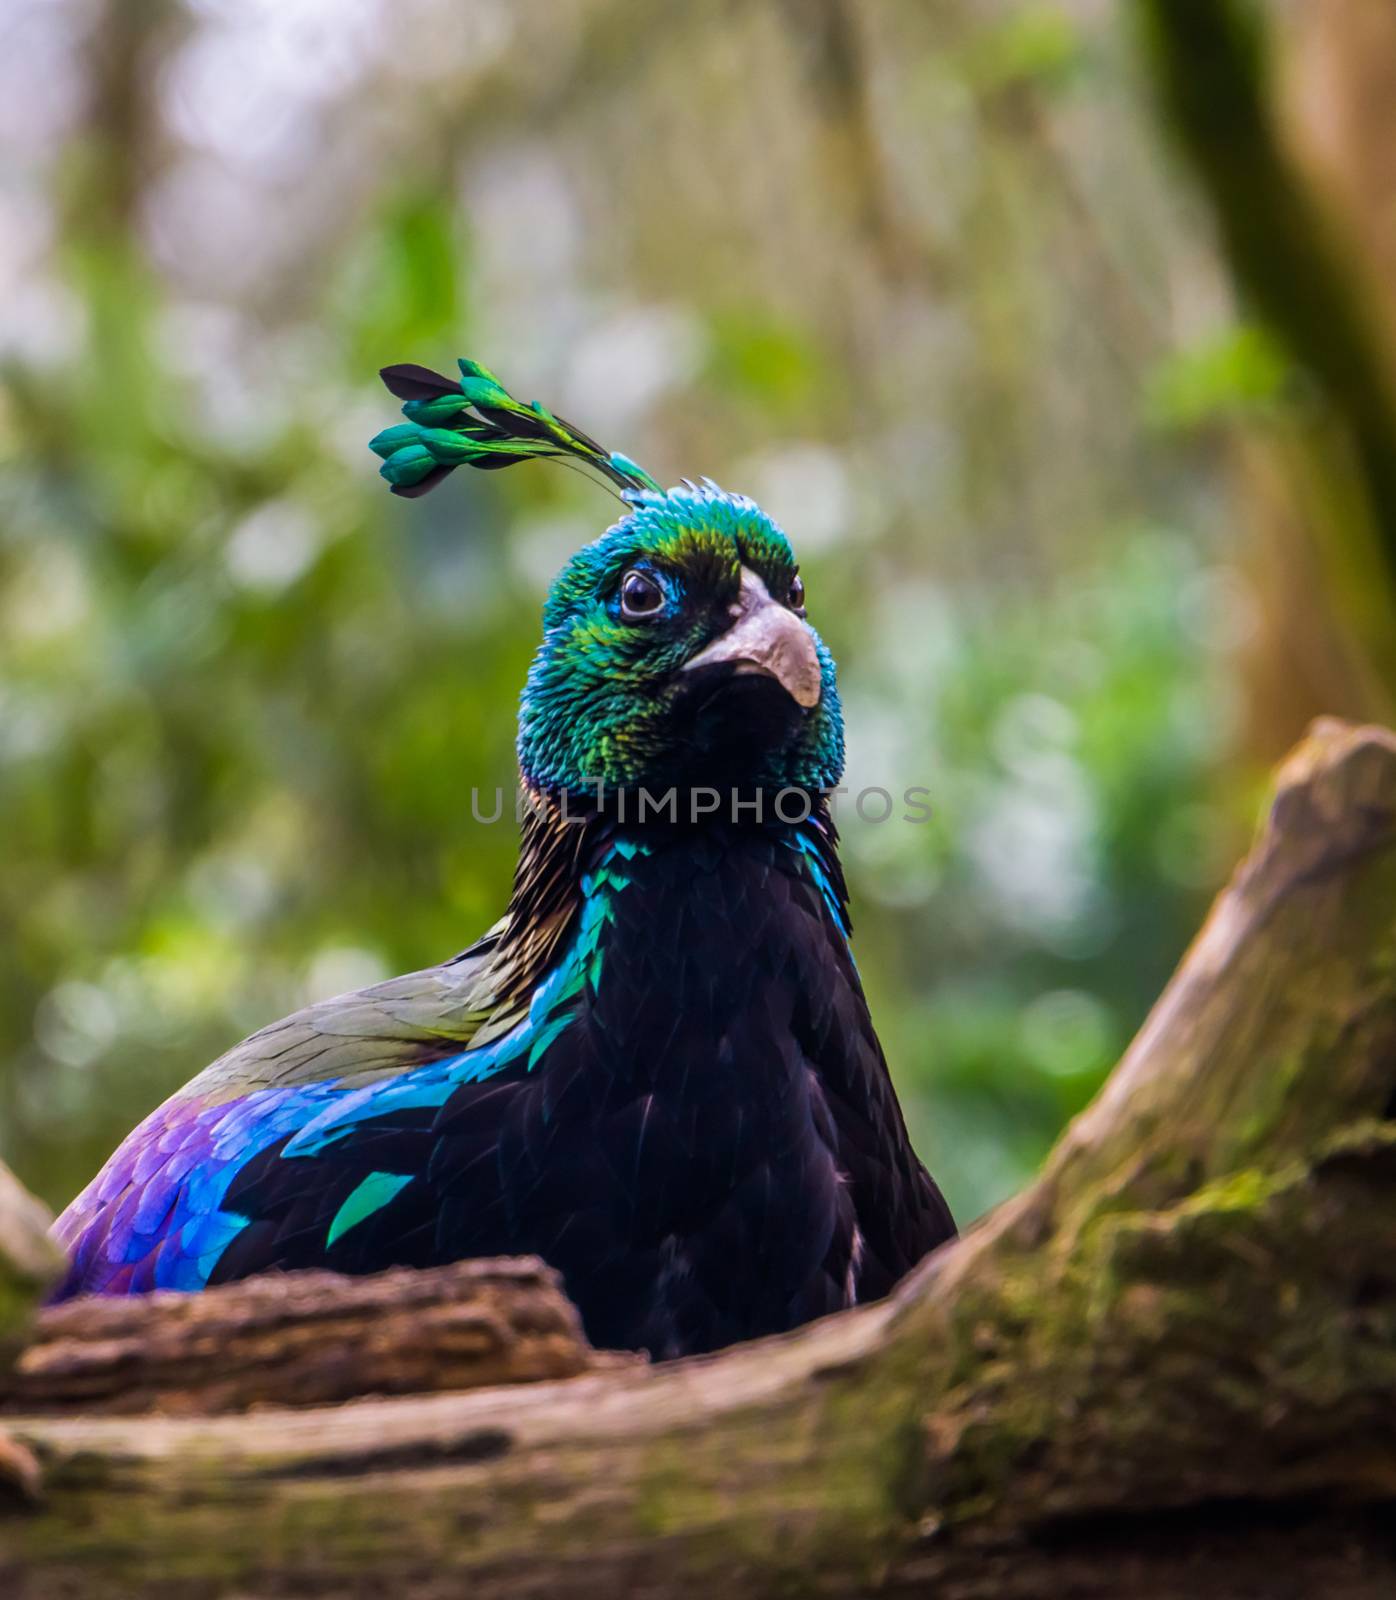 the face of a male himalayan monal in closeup, Colorful pheasant from the Himalaya mountains of India